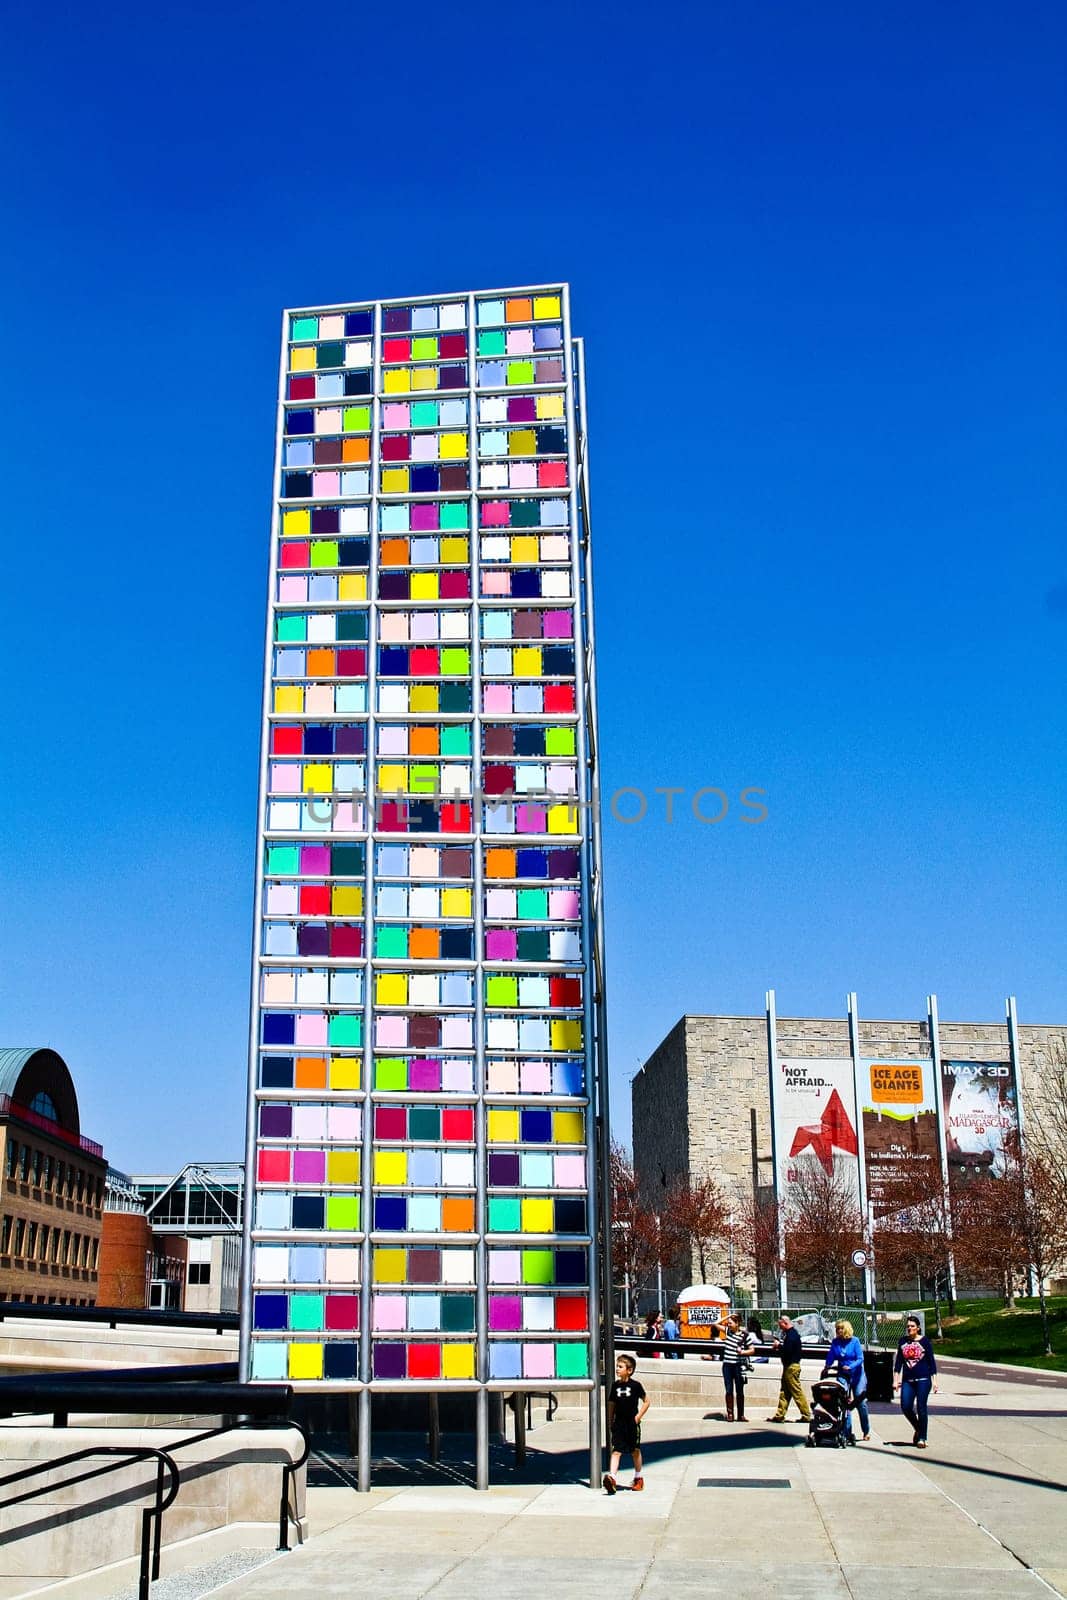 Vibrant urban sculpture in Indianapolis creates a modern, colorful focal point against a clear blue sky. The lively city atmosphere and diverse pedestrians add to the energetic and artistic appeal of this outdoor art installation.